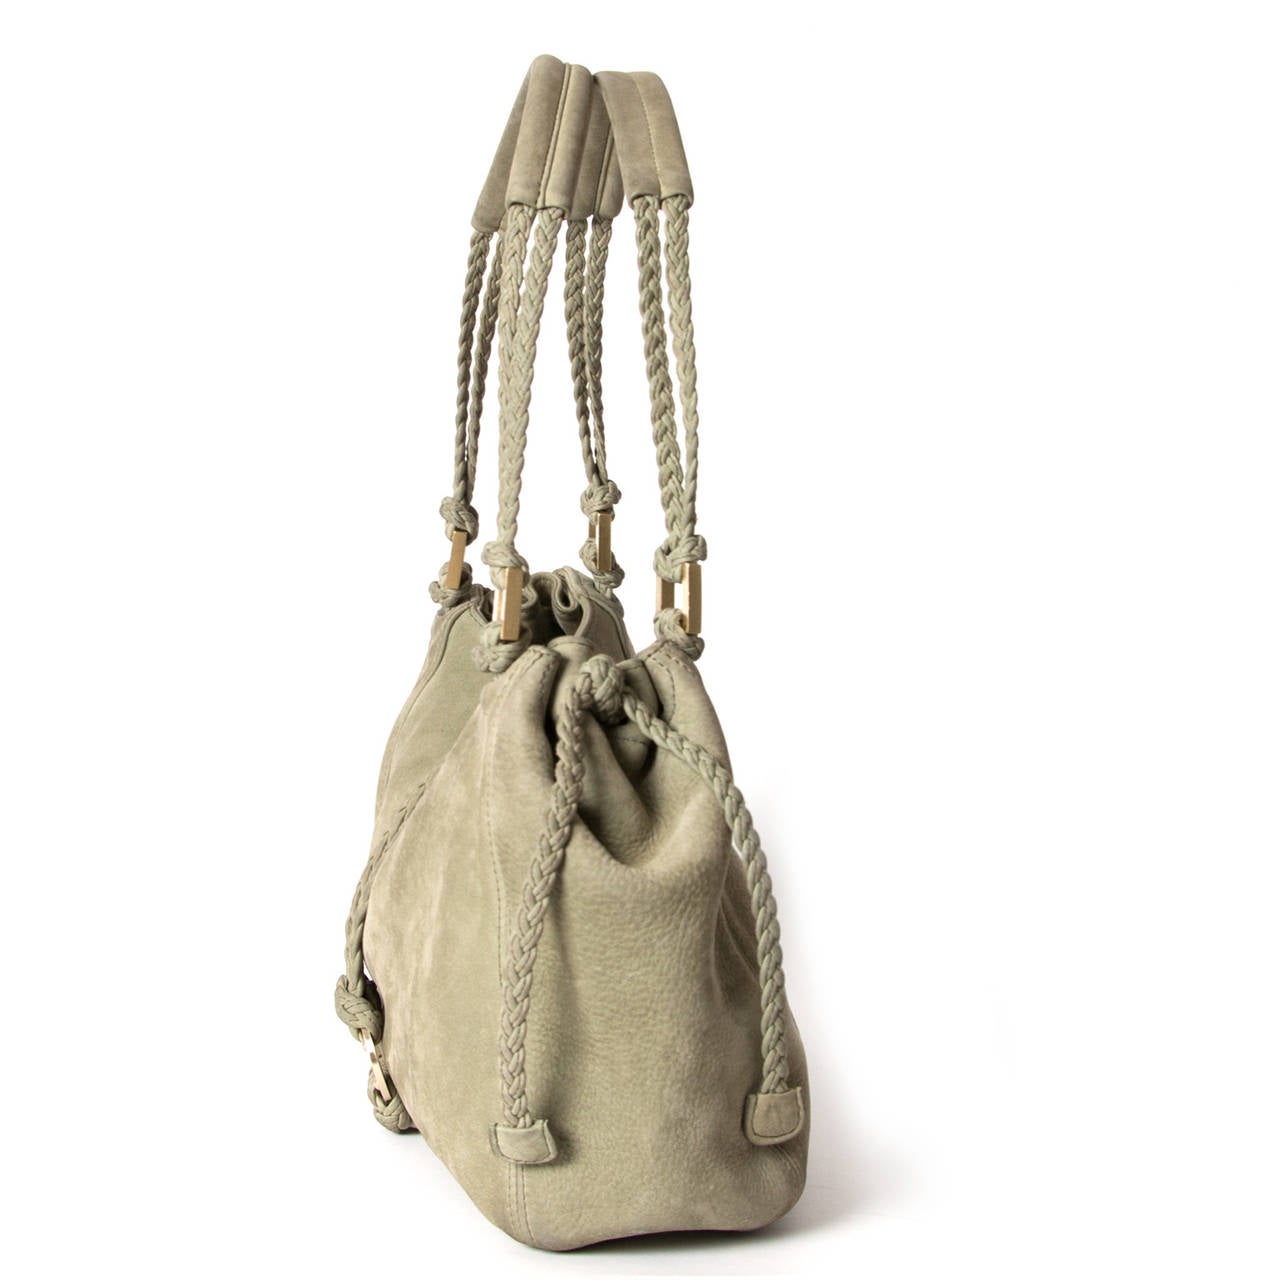 Delvaux Woven Shoulder Bag in Soft Green

Beautiful shoulder bag by Belgian house Delvaux in a soft green suede leather.

Featuring decorative braided details and gold 